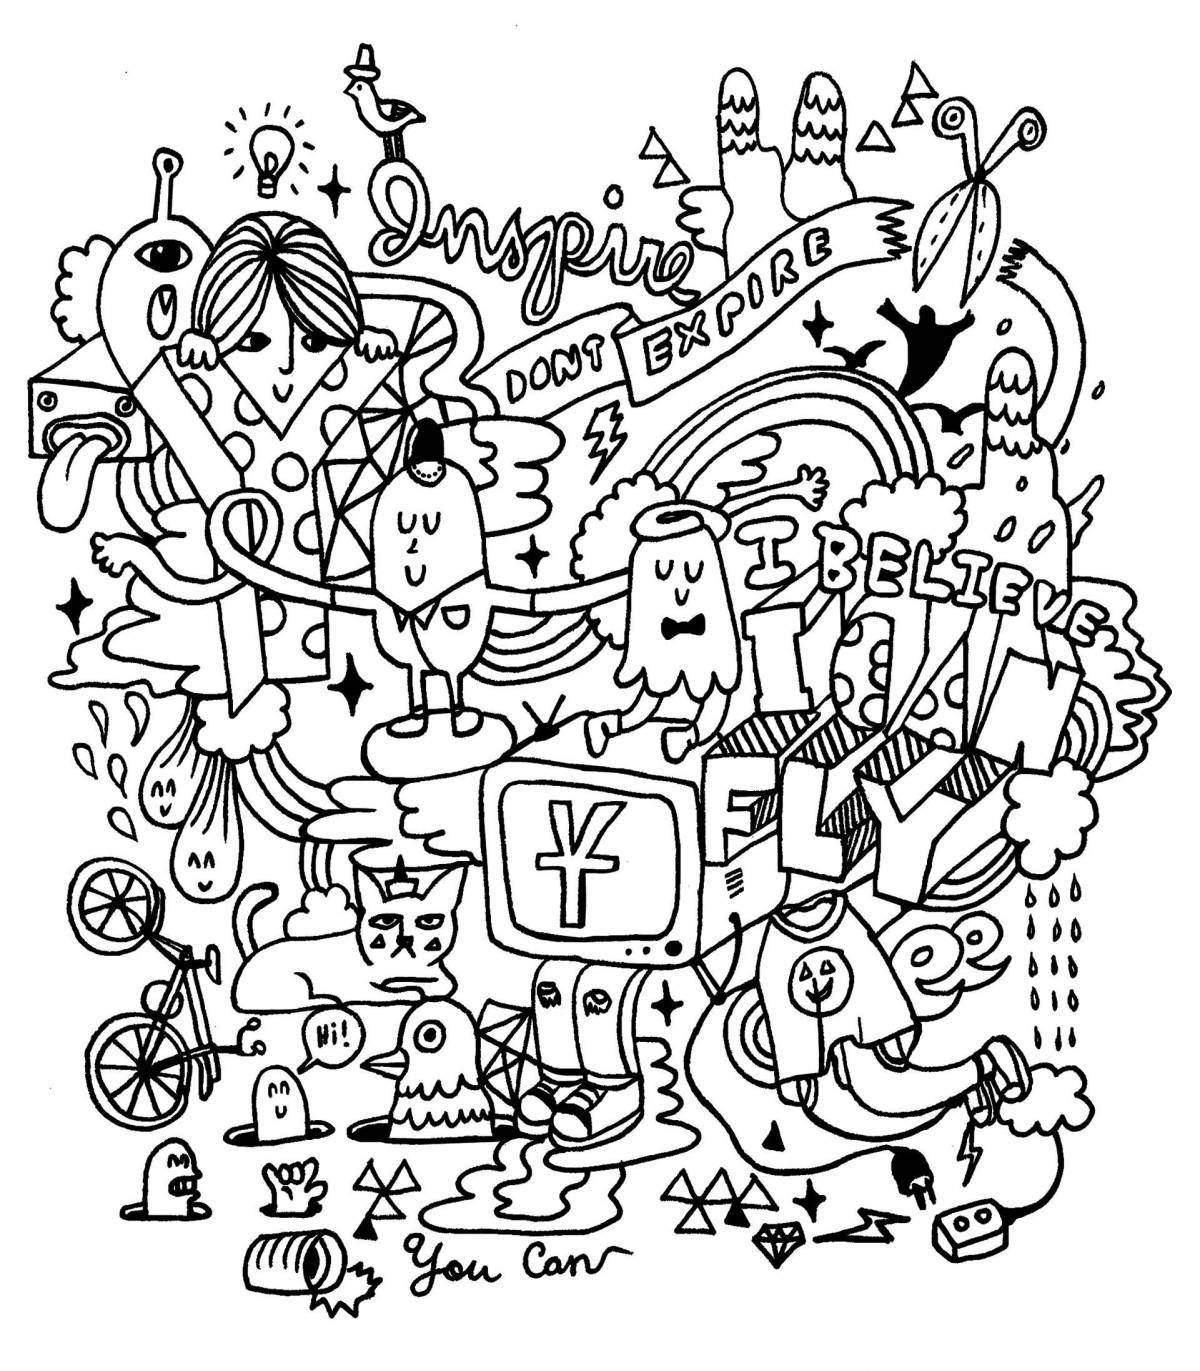 12 years old playful coloring page